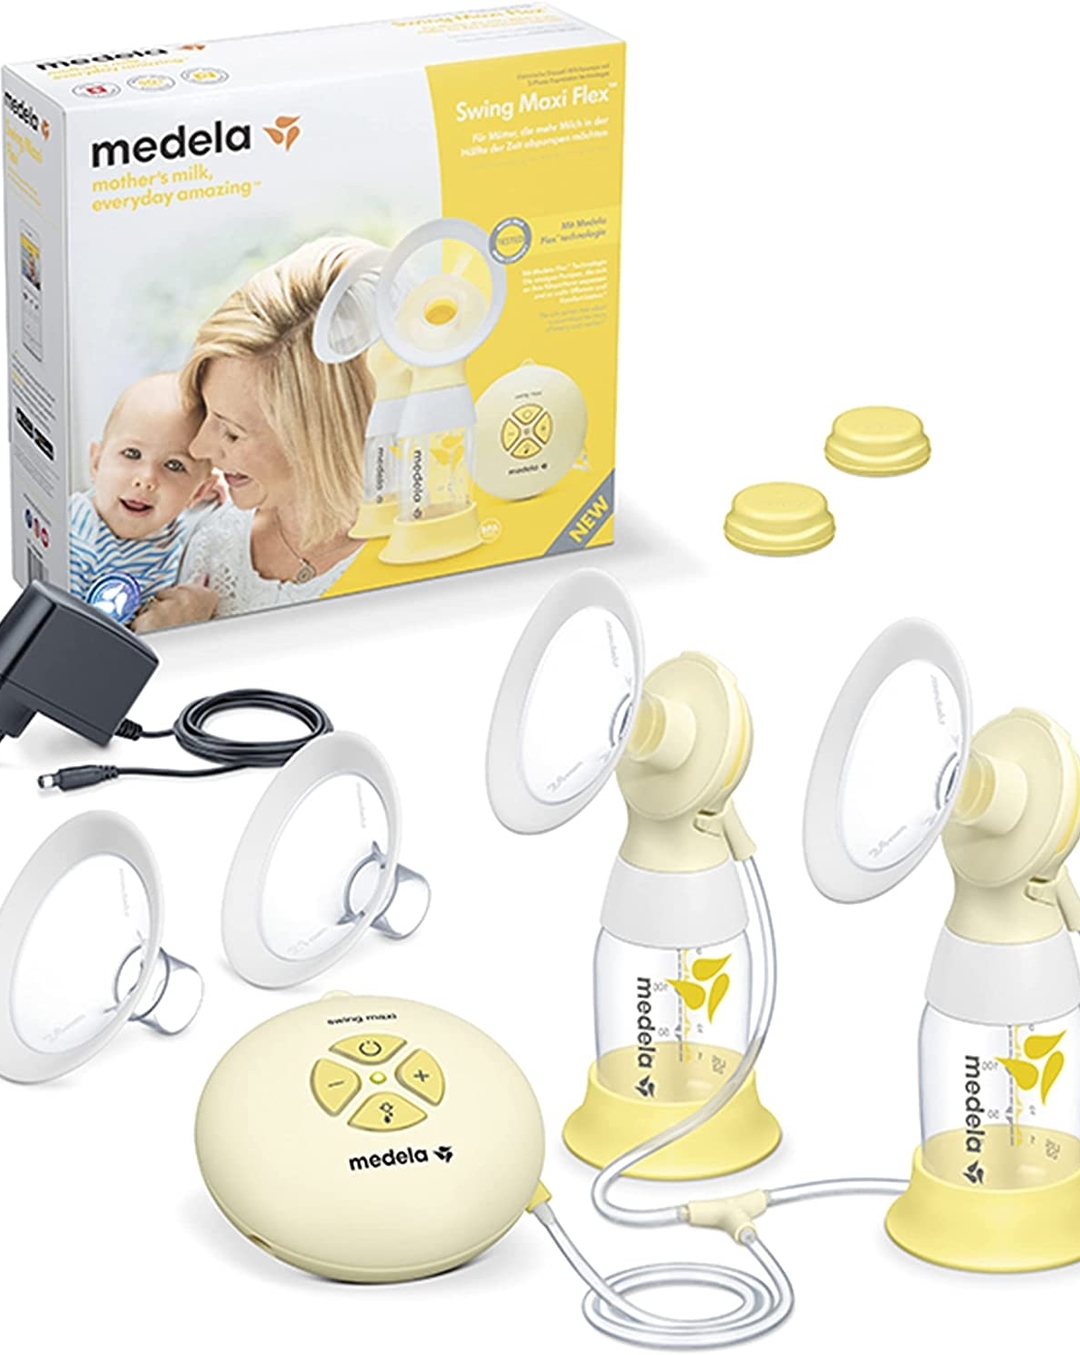 Medela  Swing Maxi Double Electric Breast Pump – Love Me Do Baby